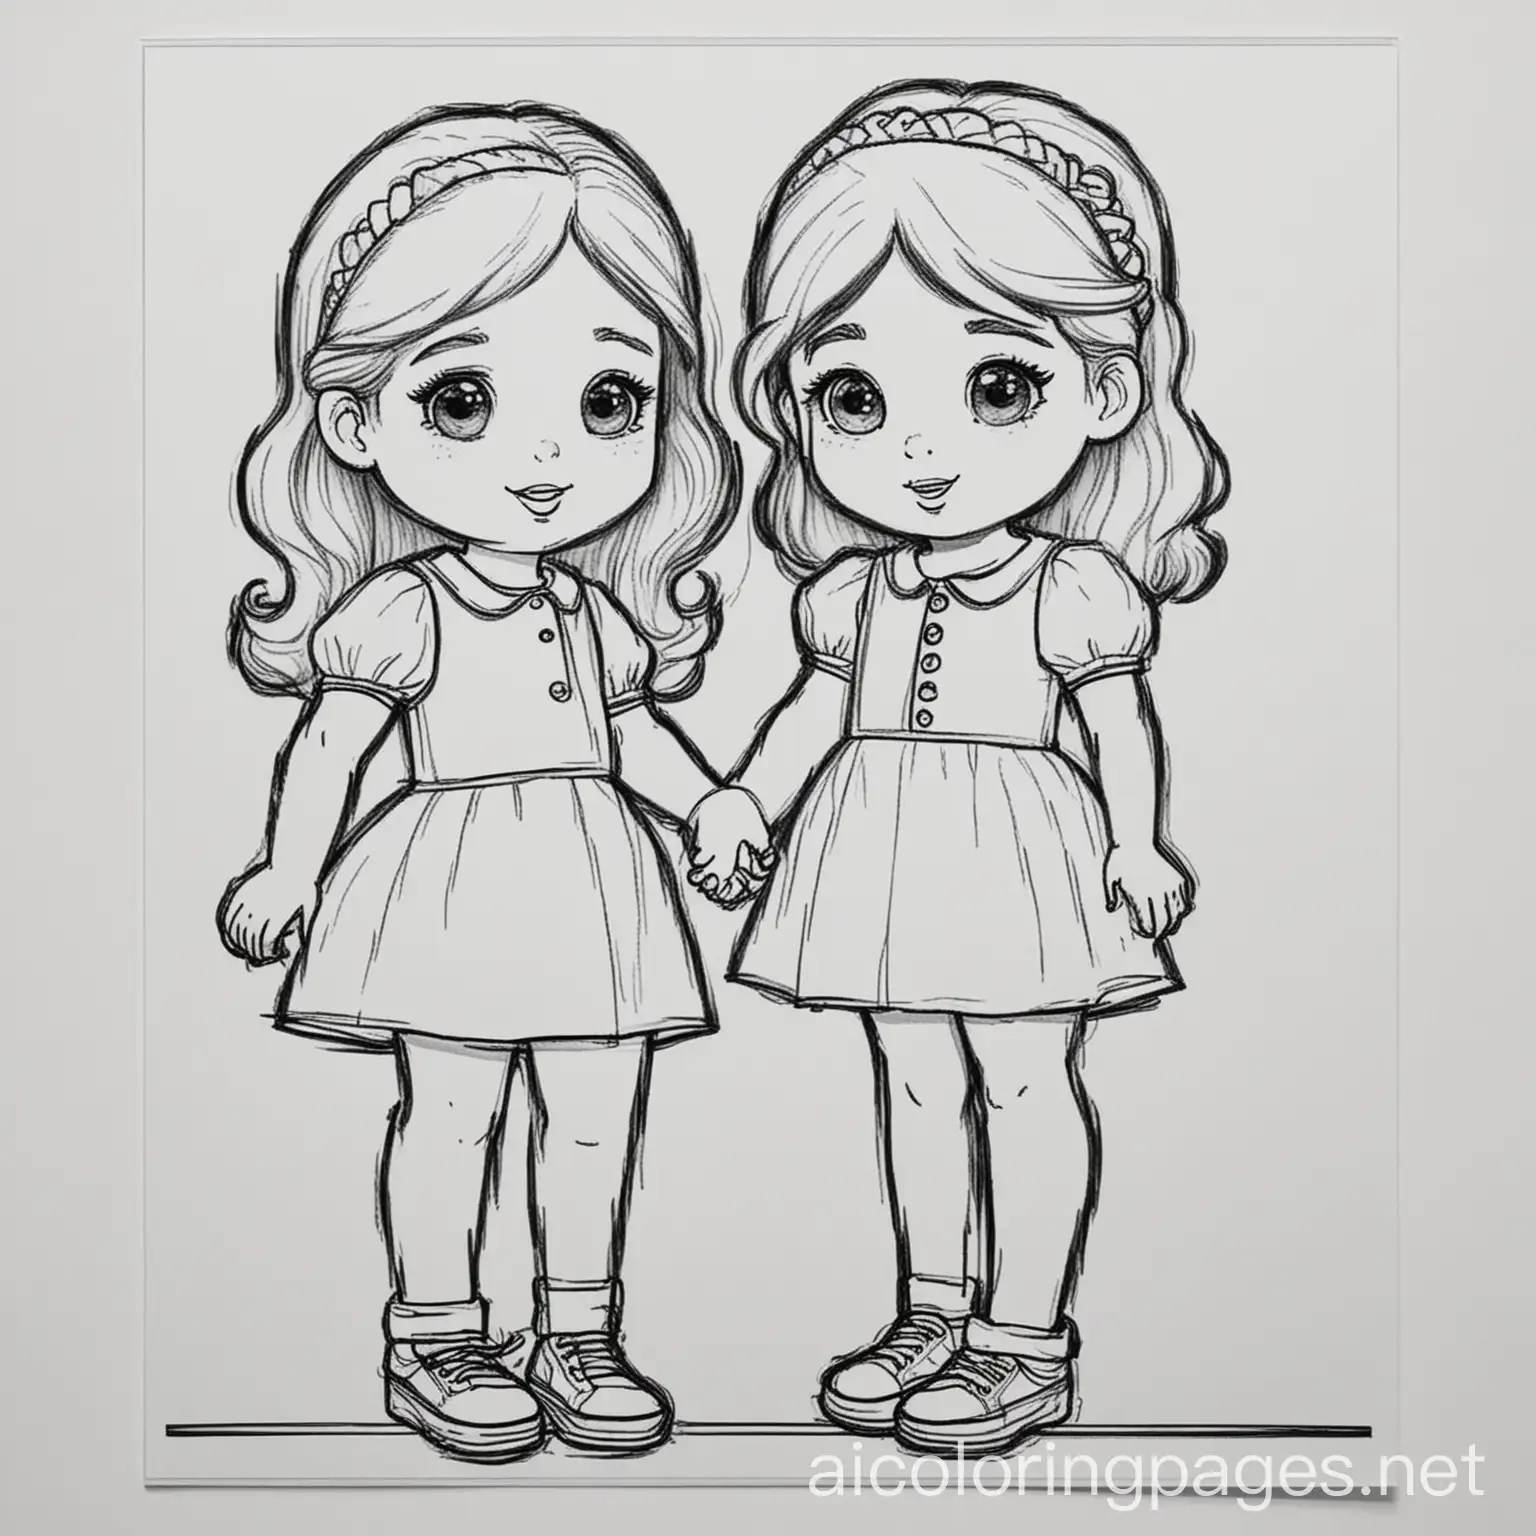 two girls meeting for the first time, Coloring Page, black and white, line art, white background, Simplicity, Ample White Space. The background of the coloring page is plain white to make it easy for young children to color within the lines. The outlines of all the subjects are easy to distinguish, making it simple for kids to color without too much difficulty